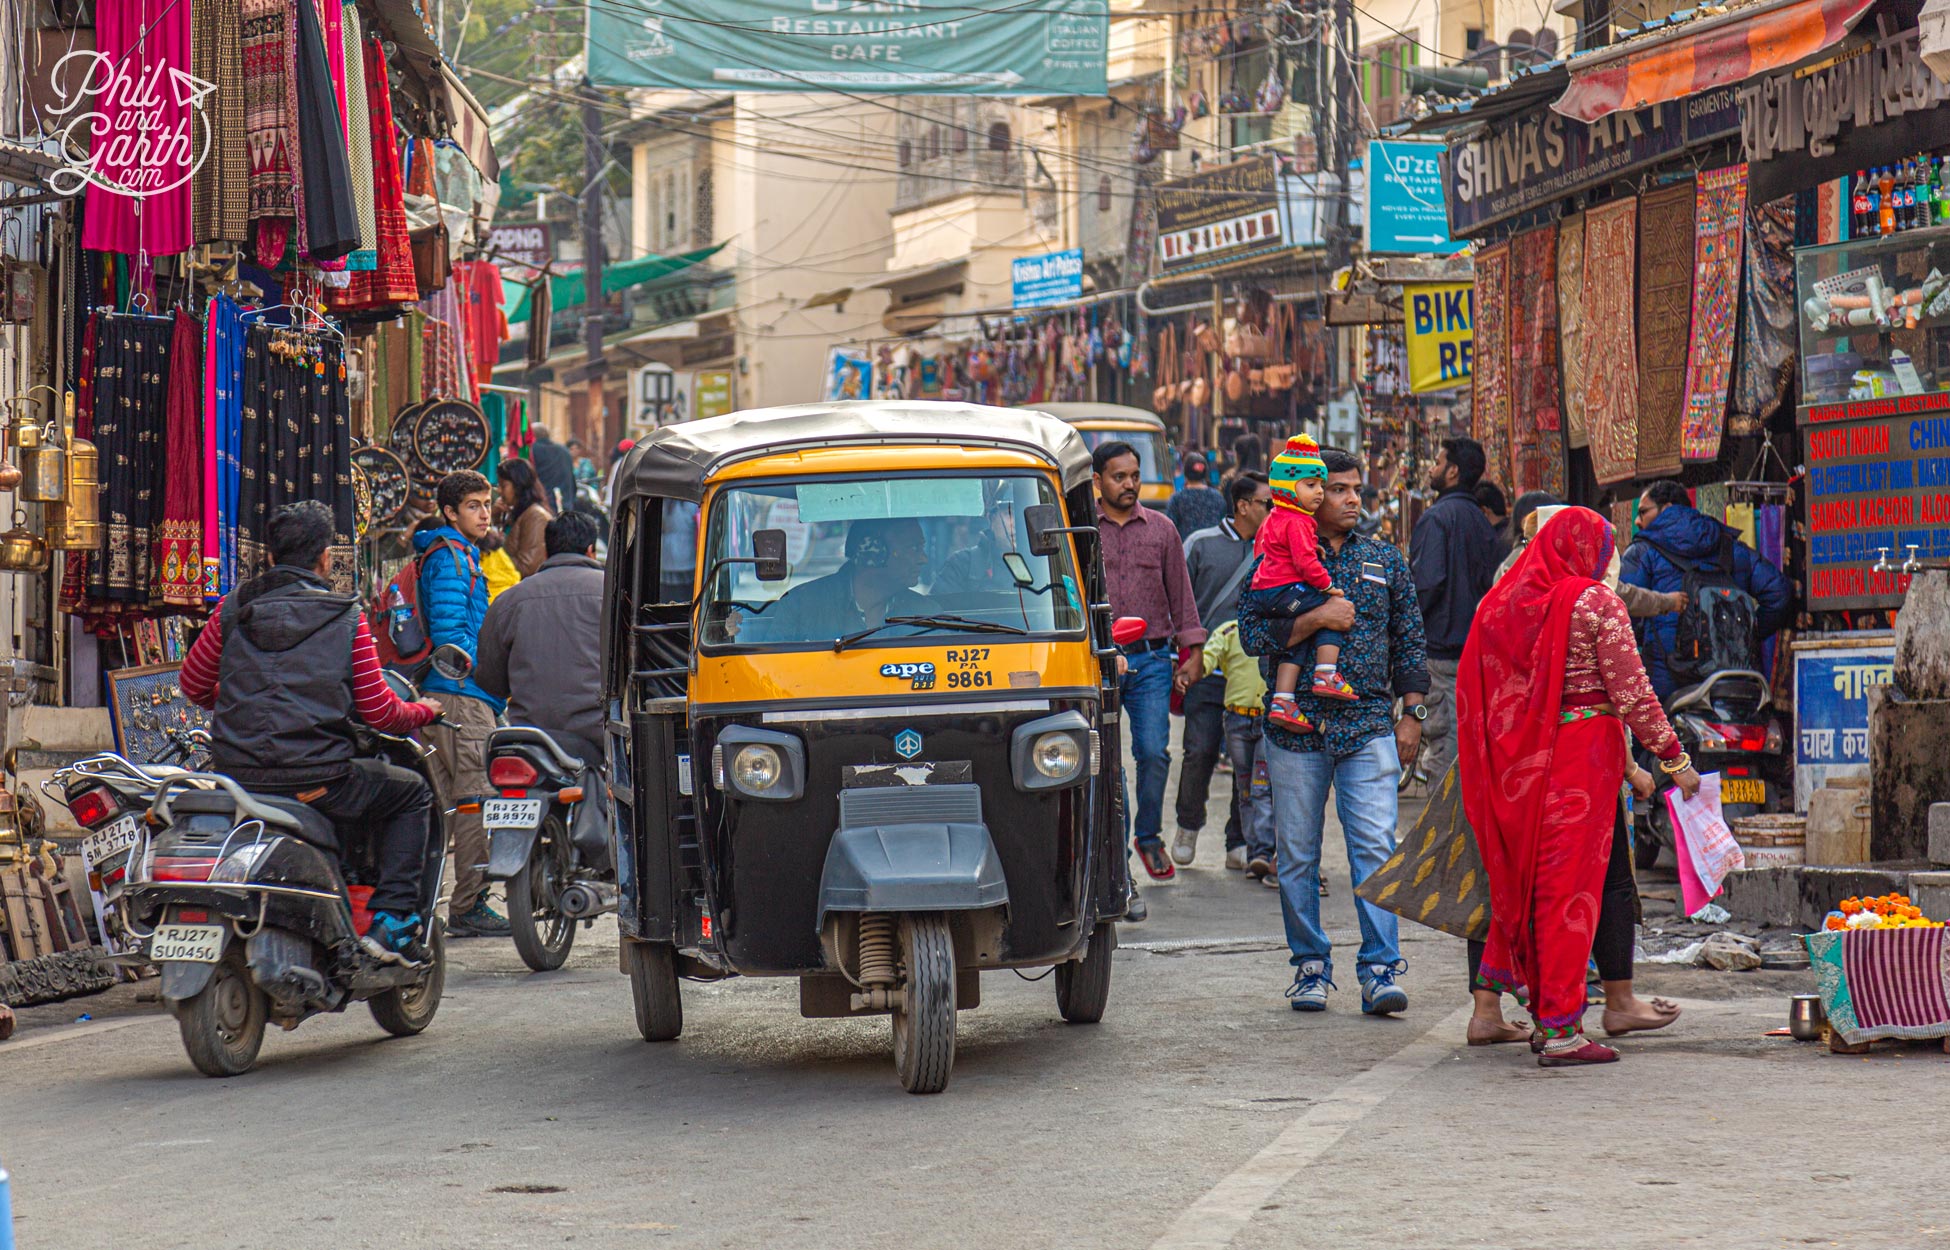 Tuk tuks vary in size by cities in India. In Udaipur they are bigger and can seat 3 people